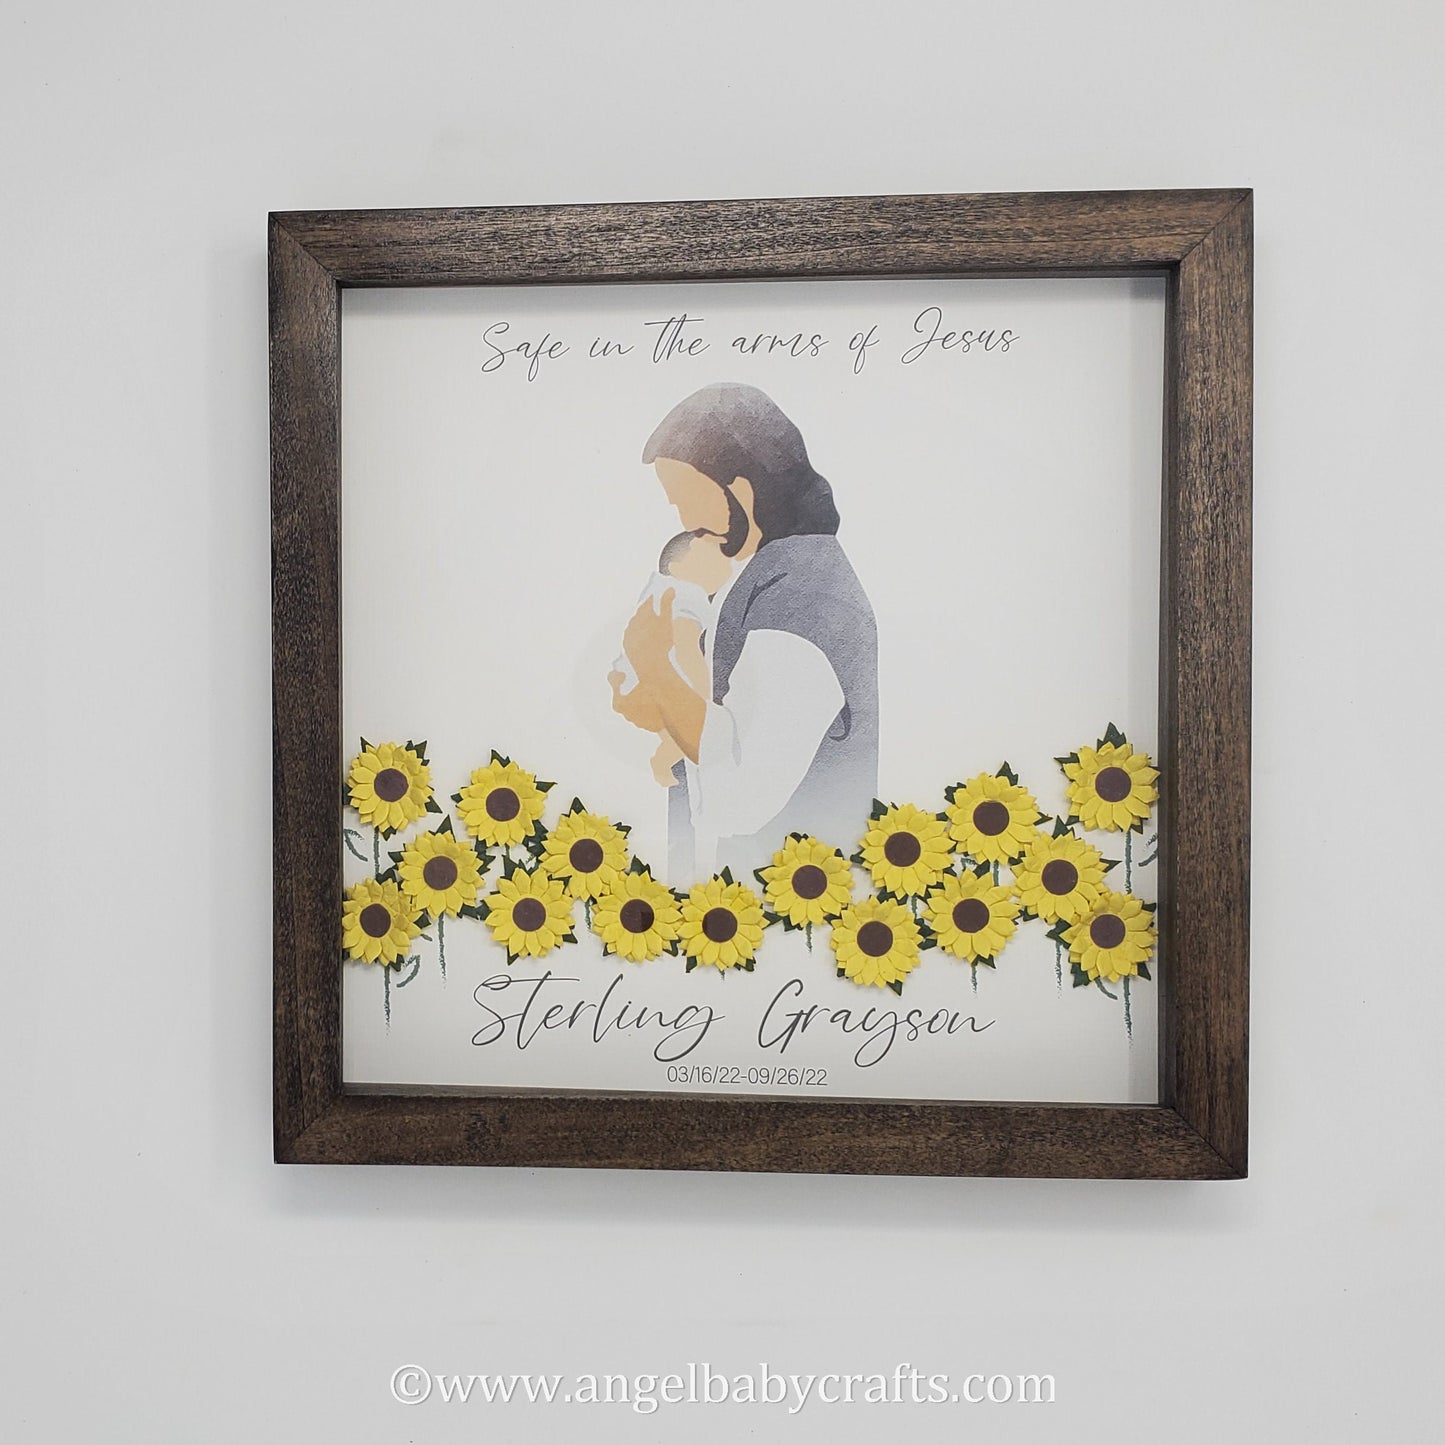 3D Jesus Holding a Baby In Field of Sunflowers Miscarriage Gift